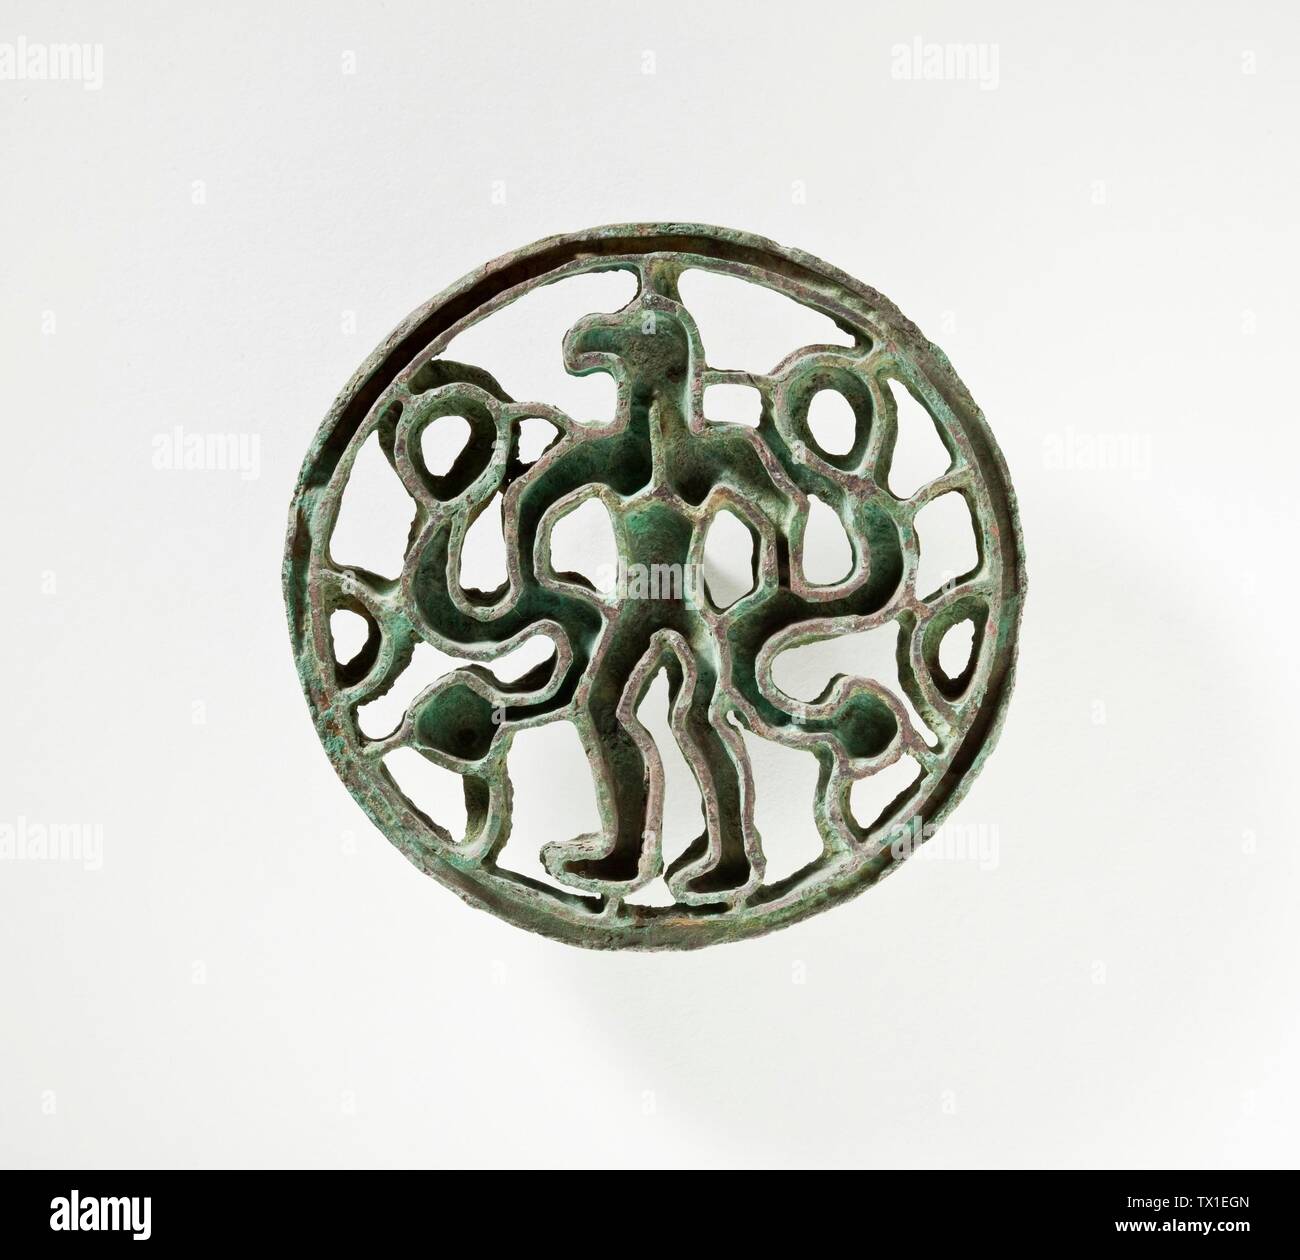 Compartmented Seal with Bird-Headed Man(garuda) with Snakes; Northern Afghanistan, 2000-1500 B.C.  Tools and Equipment; seals Bronze 2 7/8 in. (7.30 cm) Shinji Shumeikai Acquisition Fund (AC1995.5.6) Art of the Ancient Near East Currently on public view:; 2000-1500 B.C.; Stock Photo